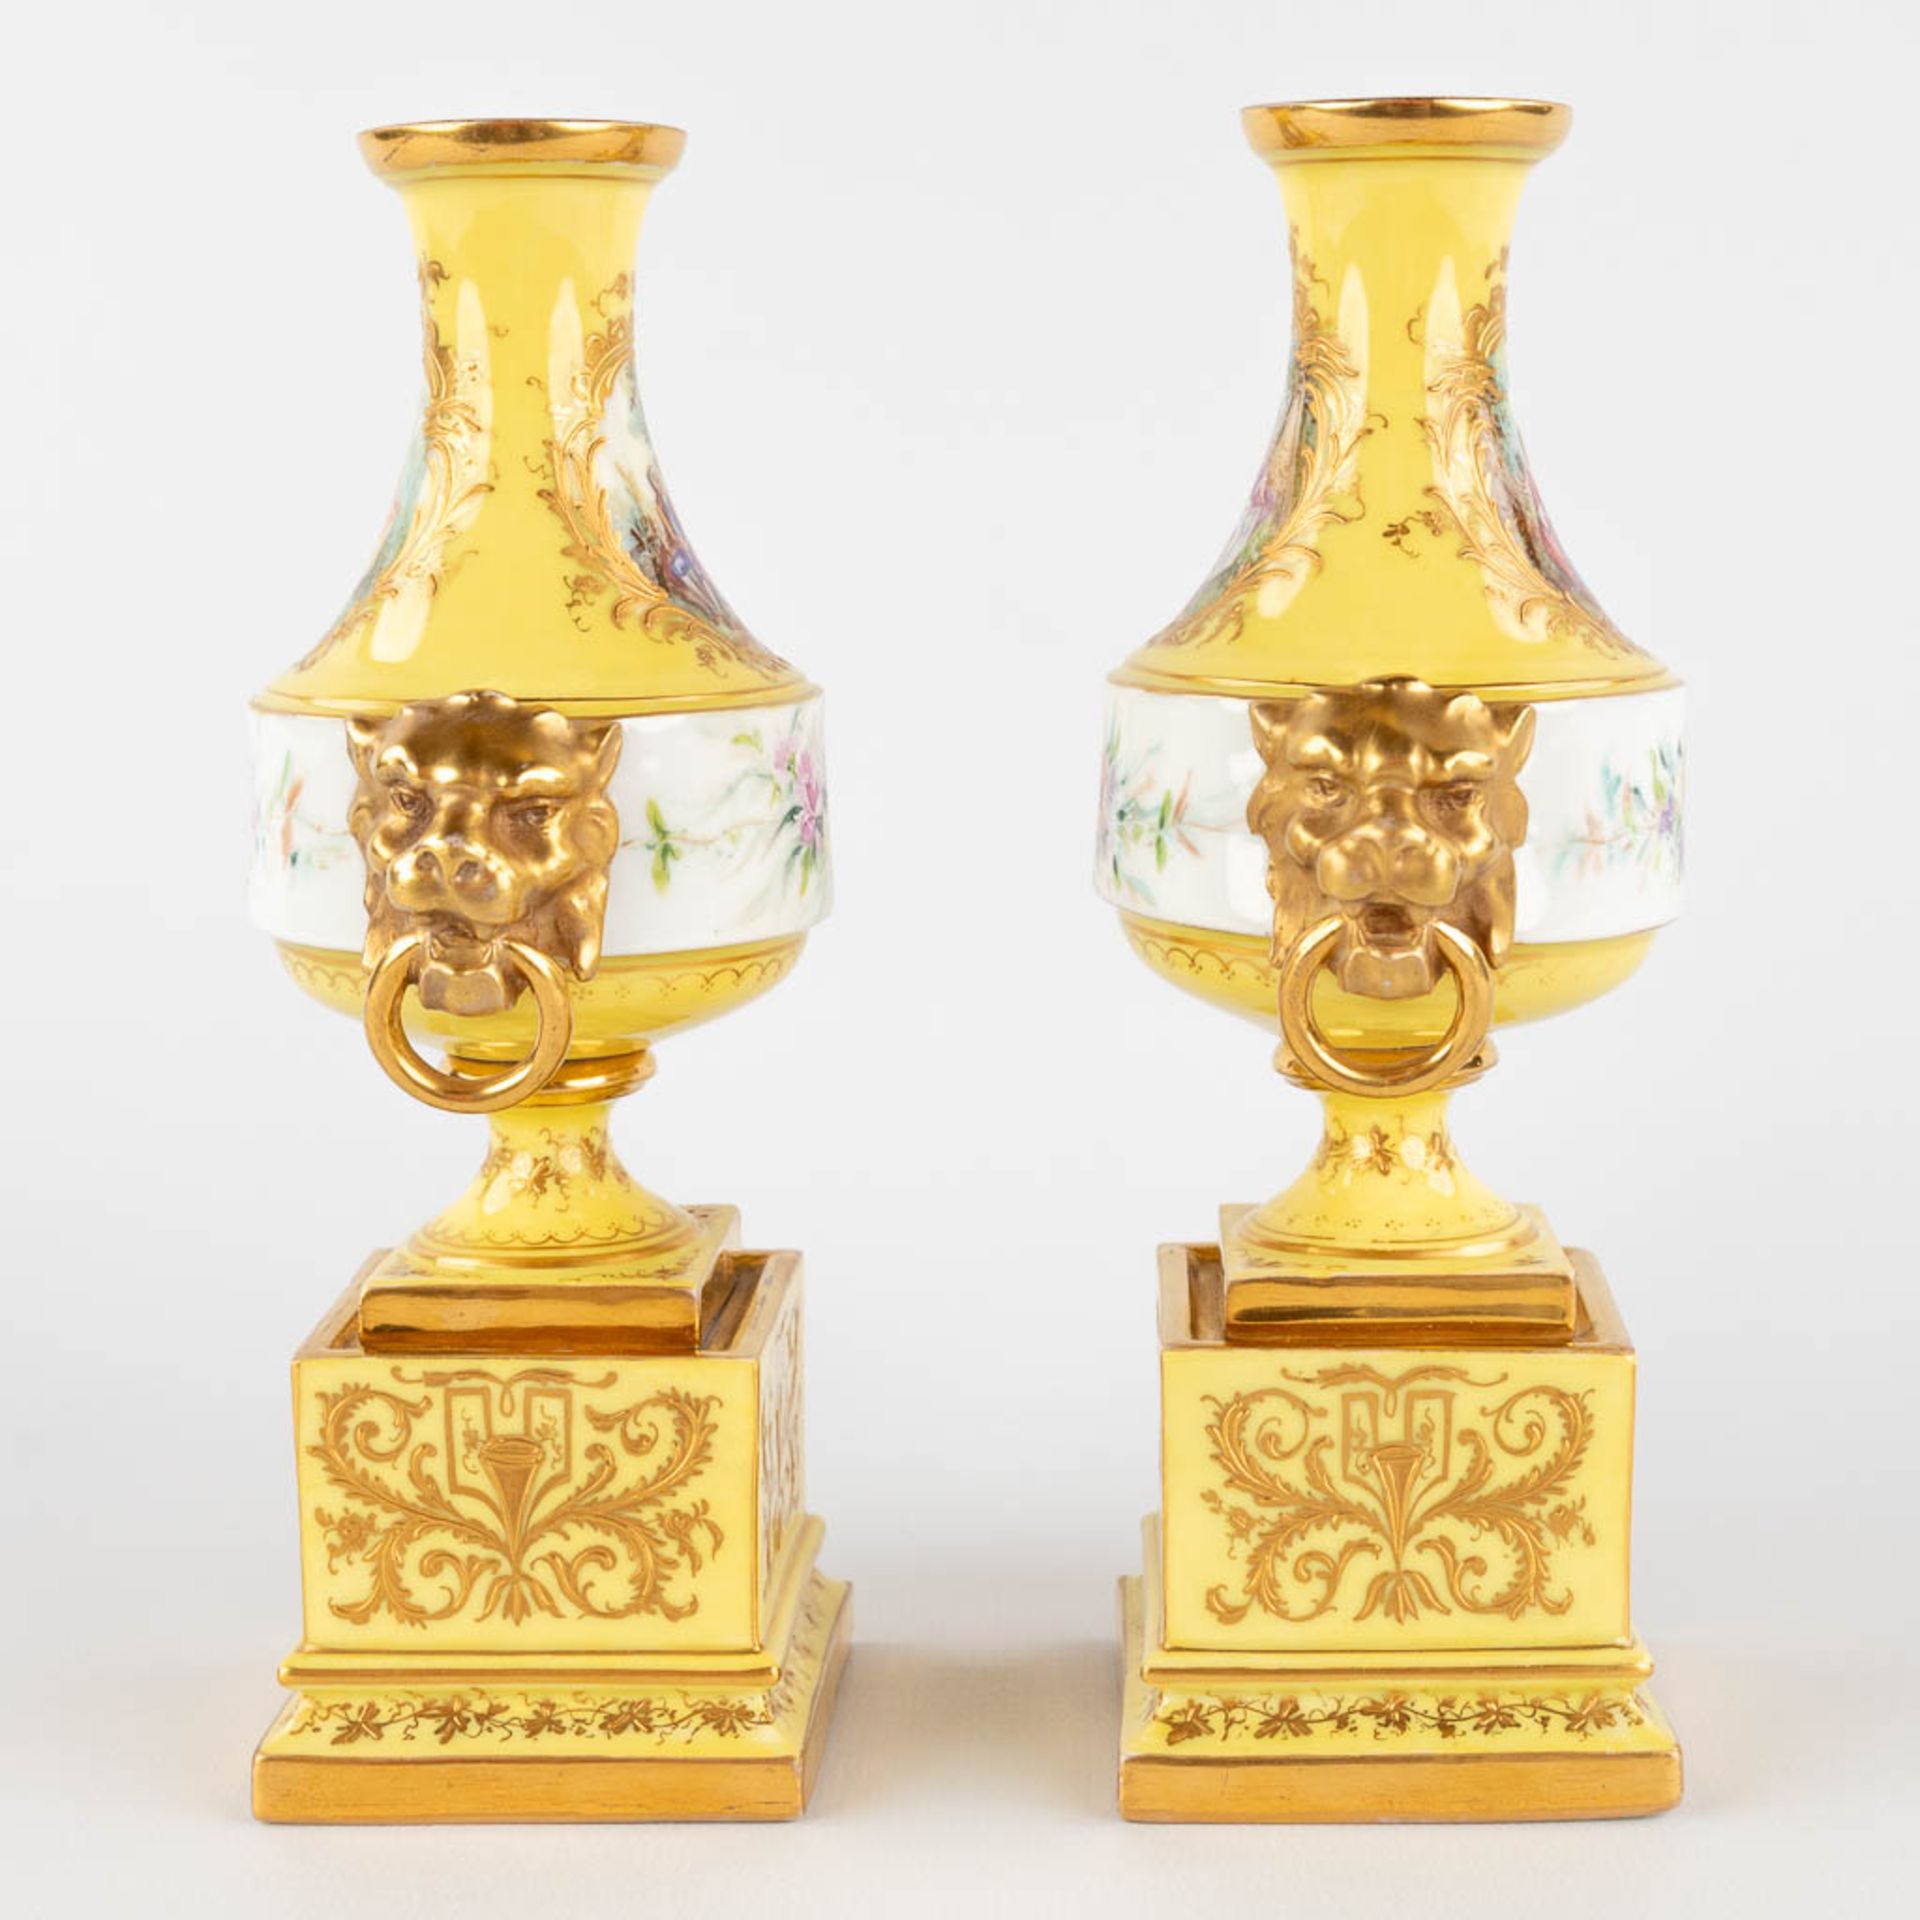 A pair of antique, hand-painted porcelain vases, yellow glaze and flower with lion's heads decor. (L - Image 4 of 16